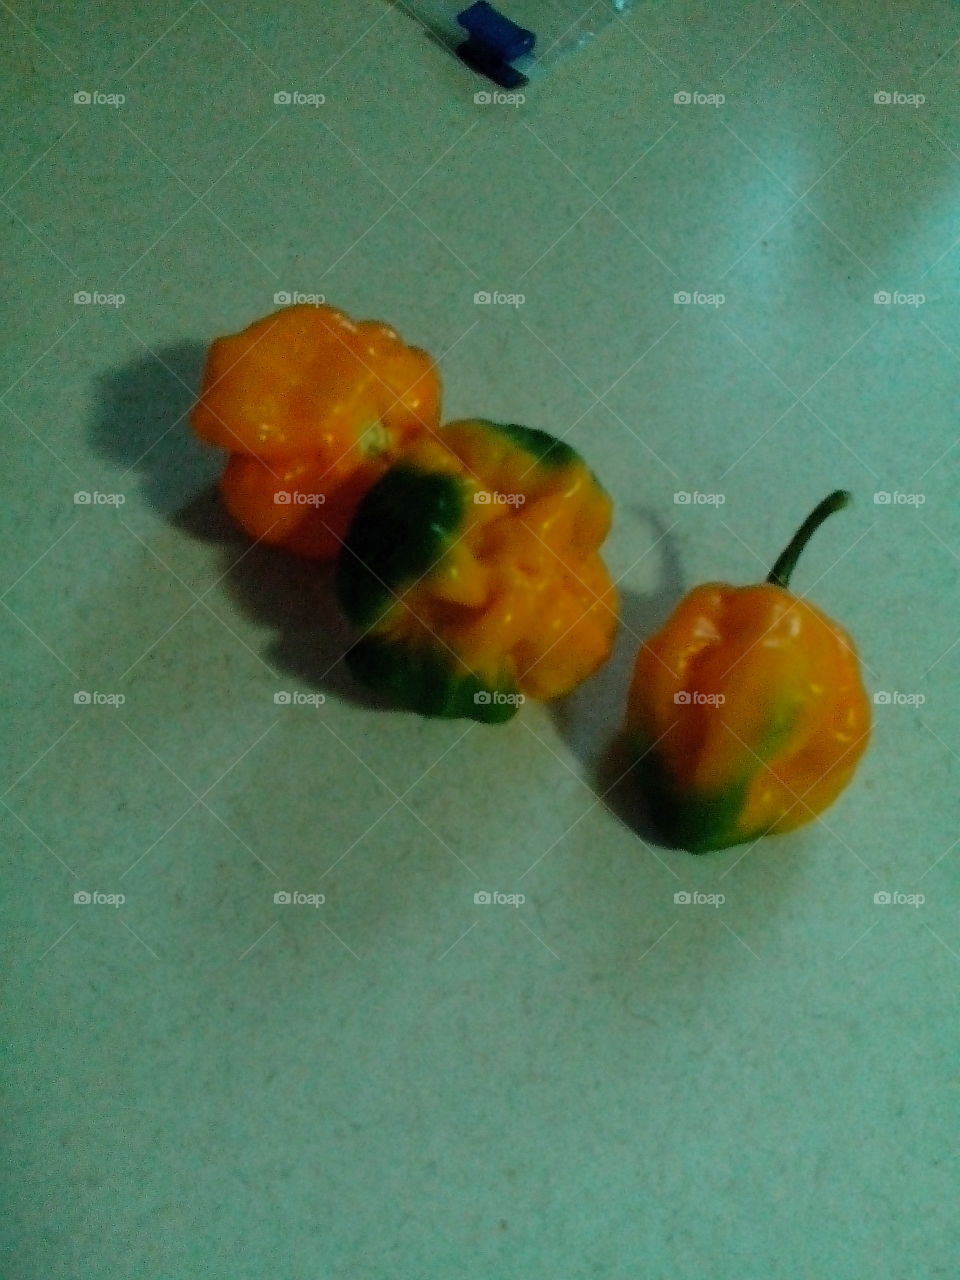 out of the garden..Scotch bonnet peppers